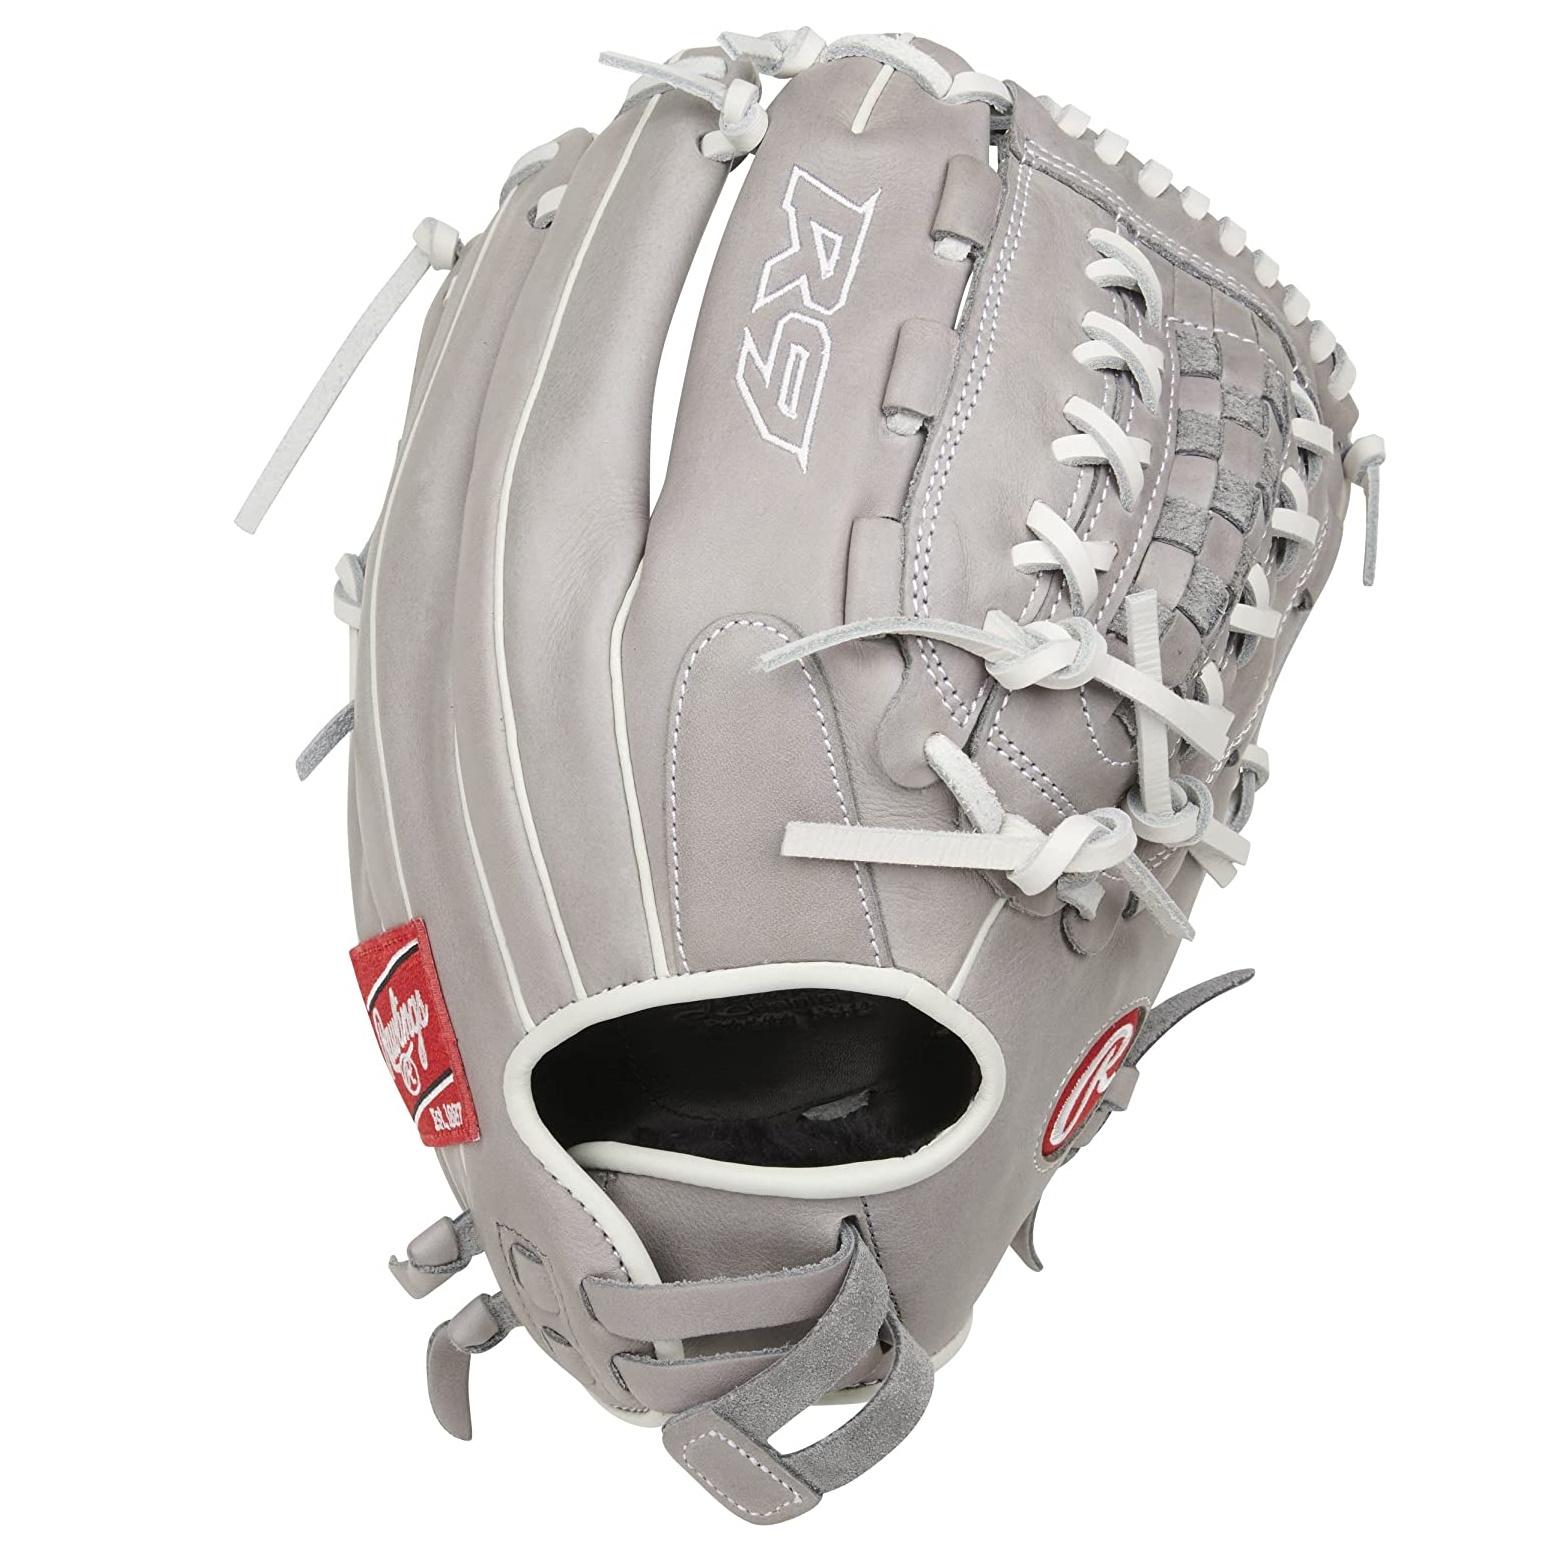 rawlings-r9-series-fastpitch-softball-glove-double-lace-basket-web-12-5-inch-right-hand-throw R9SB125-18G-RightHandThrow Rawlings  <p><span style=font-size large;>The all new R9 Series softball gloves are the